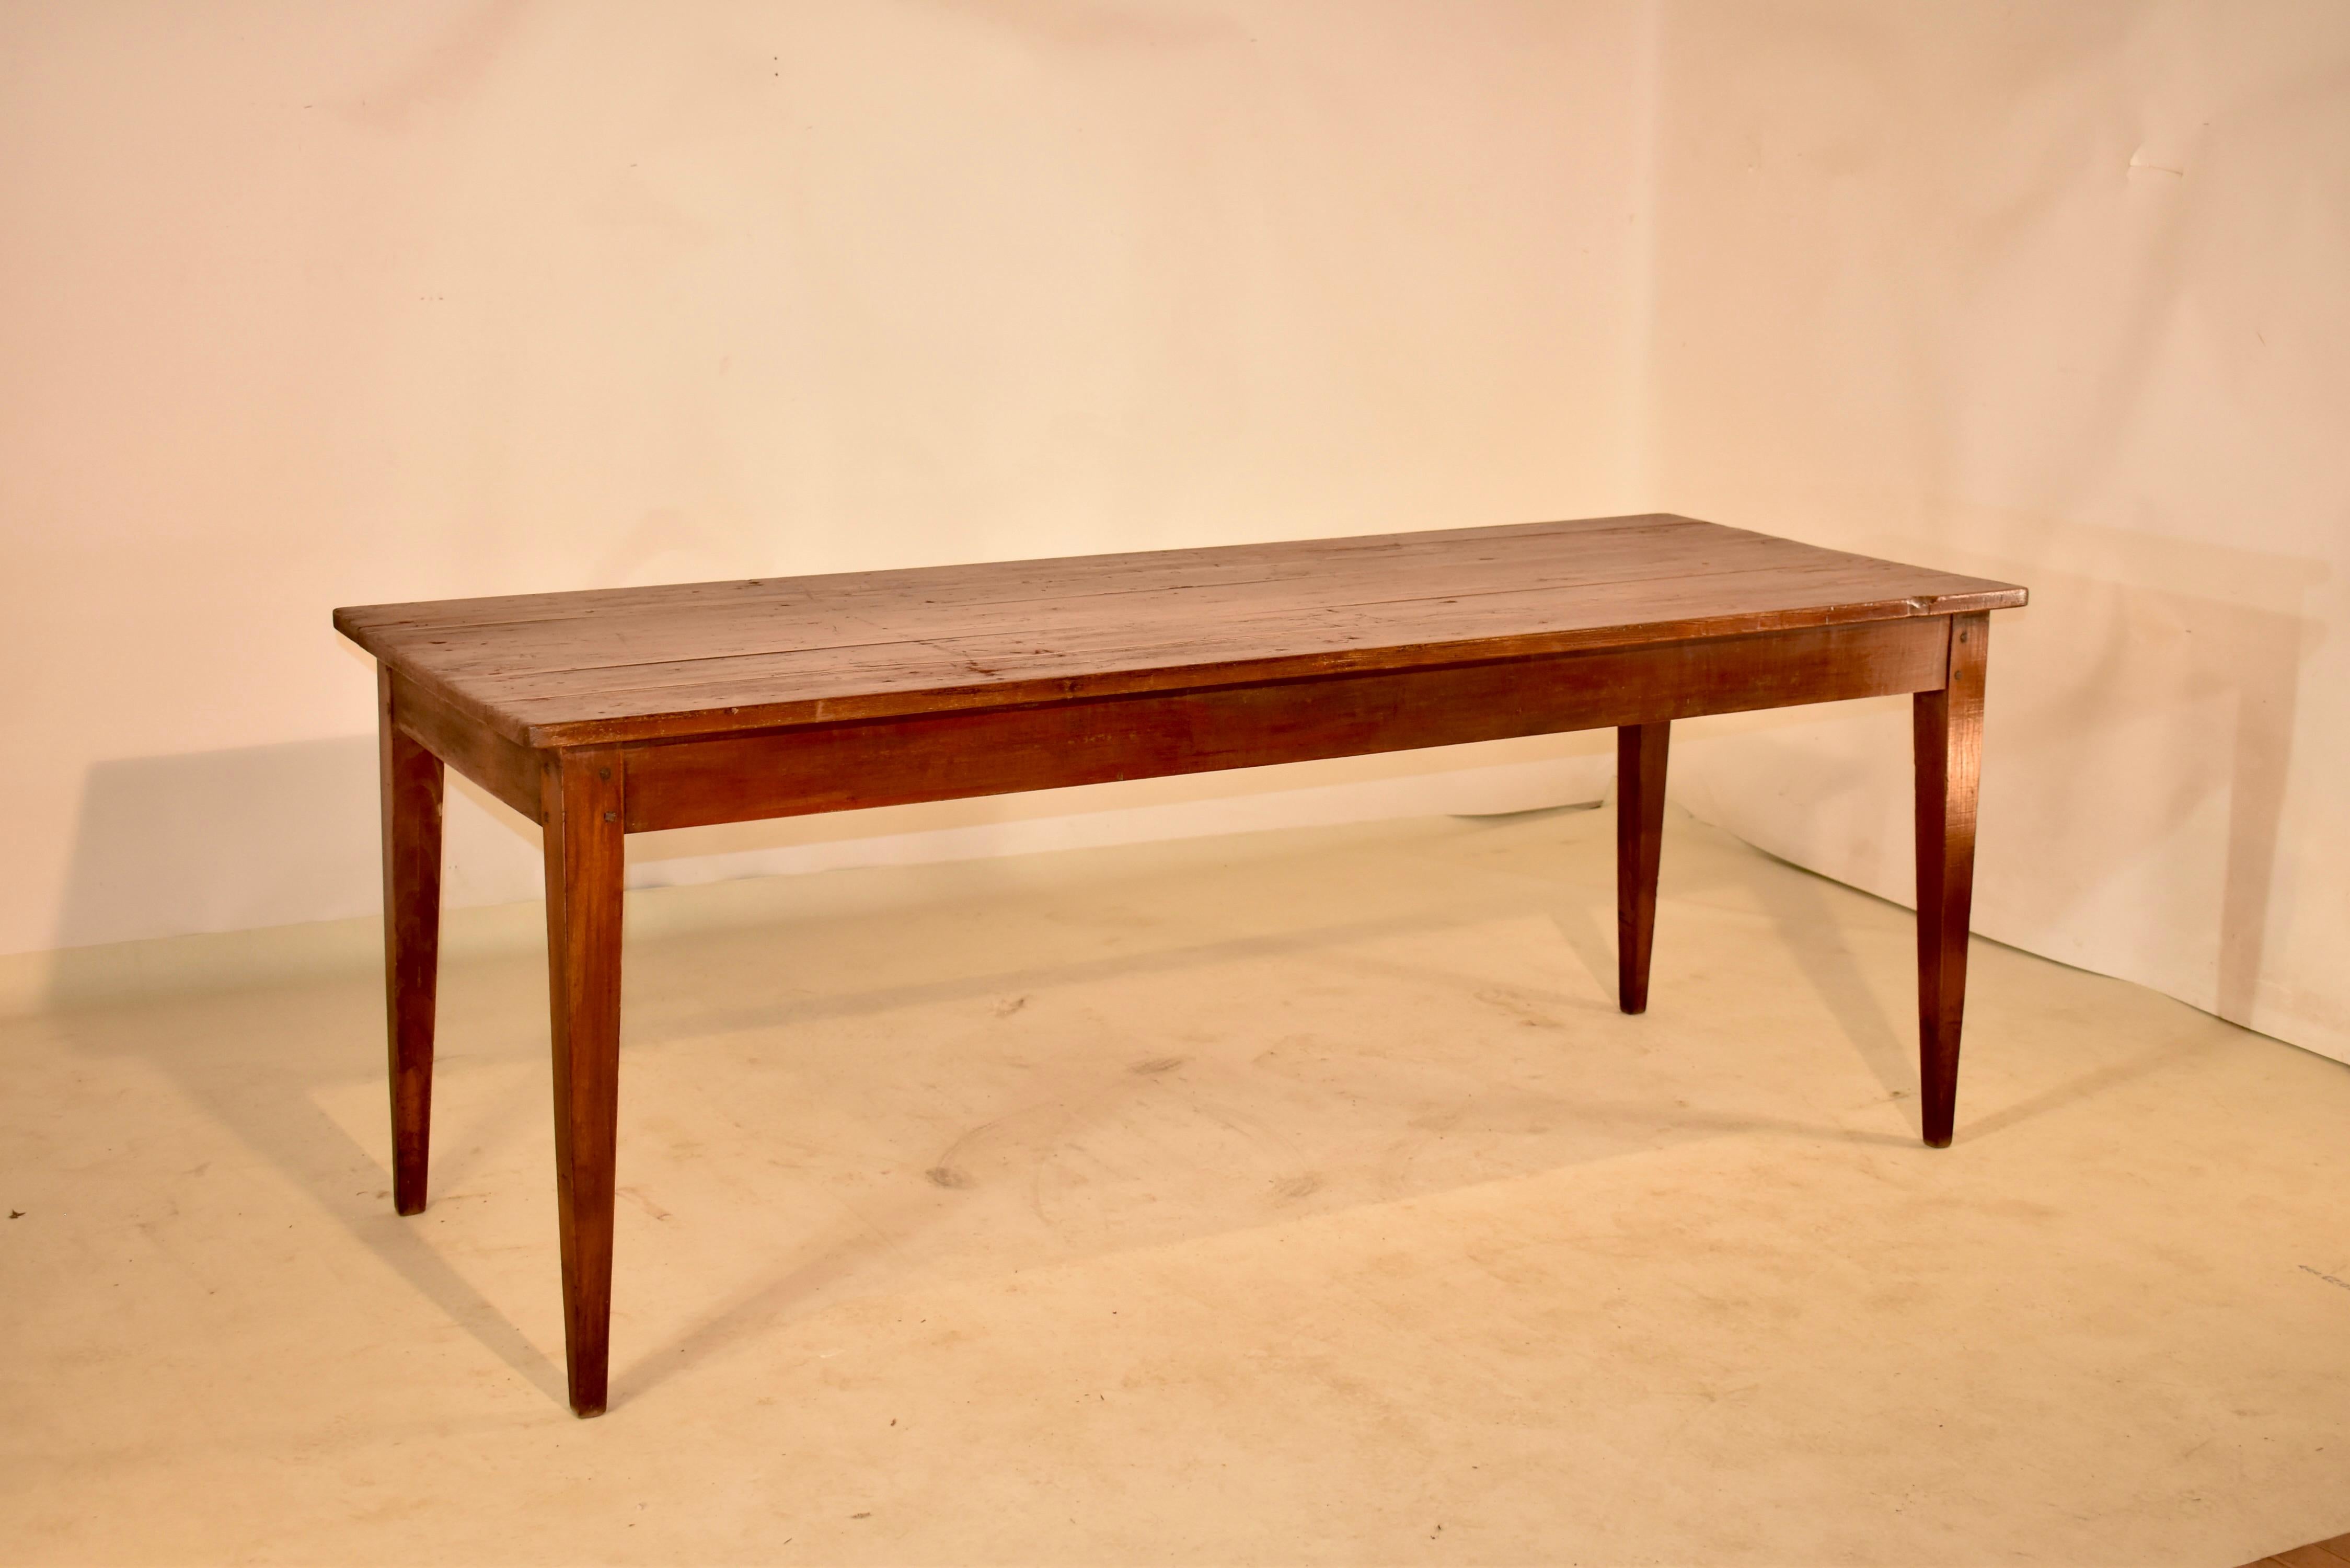 Early 19th century farm table from France made from pine and elm. The top is made from pine planks, and is supported on an elm base, which has a simple apron that measures 25 inches in height and follows down to simply elegant tapered legs. The